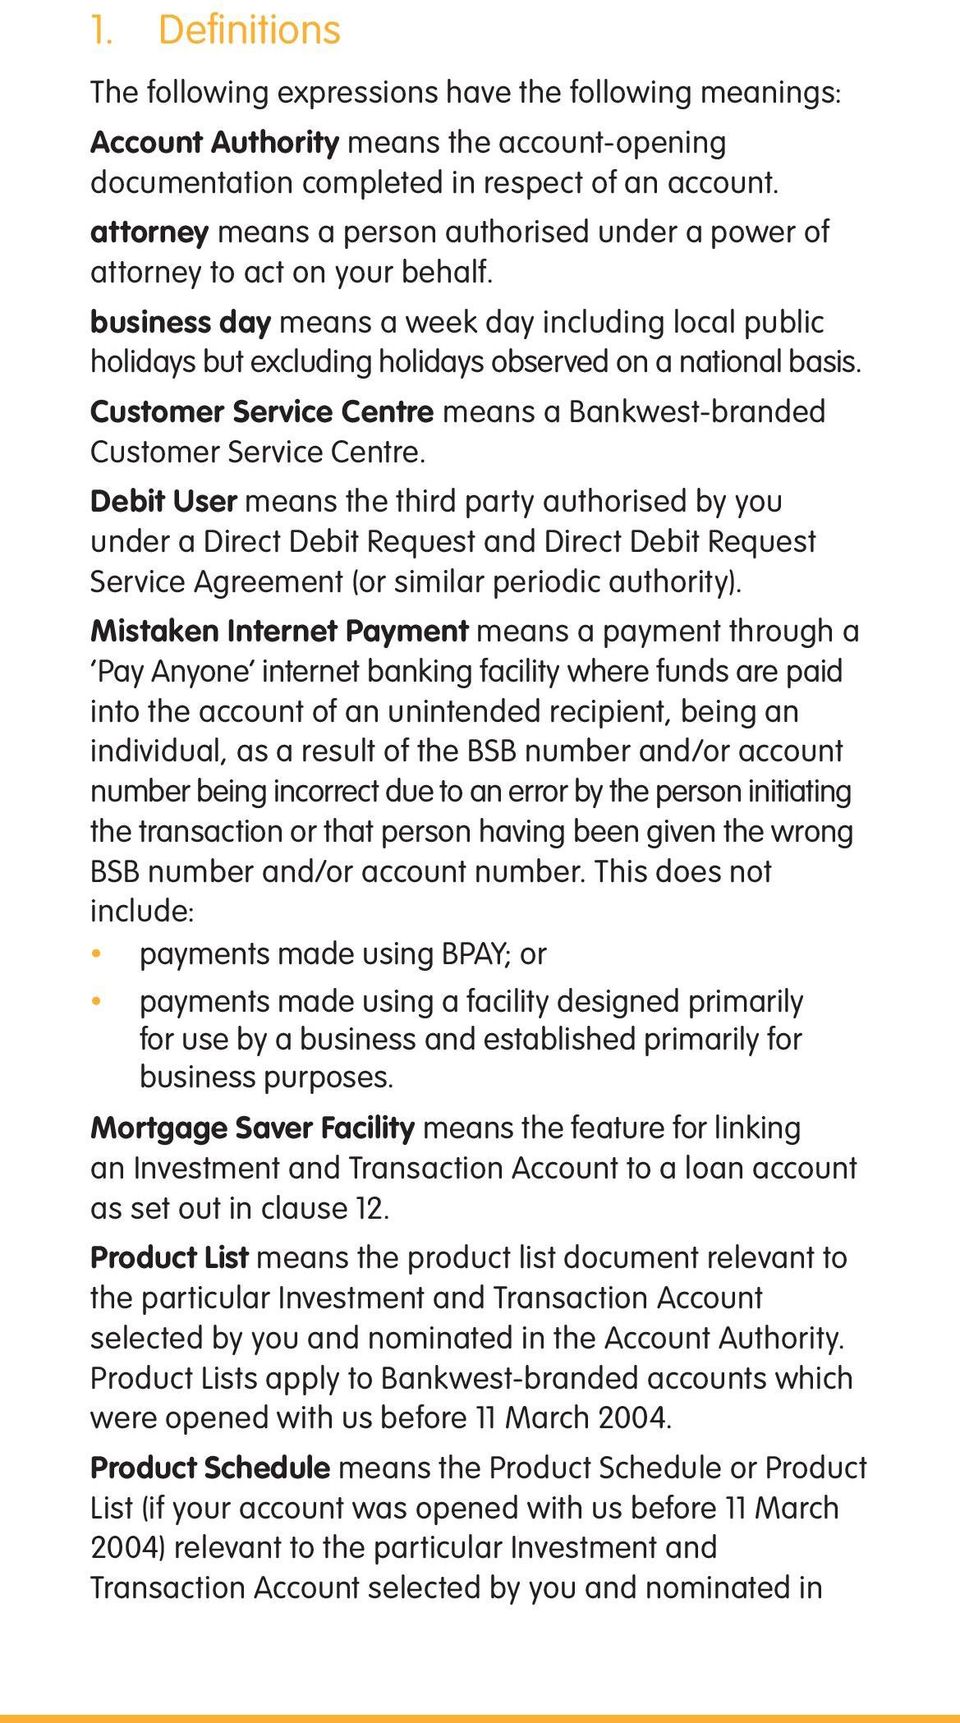 Customer Service Centre means a Bankwest-branded Customer Service Centre.